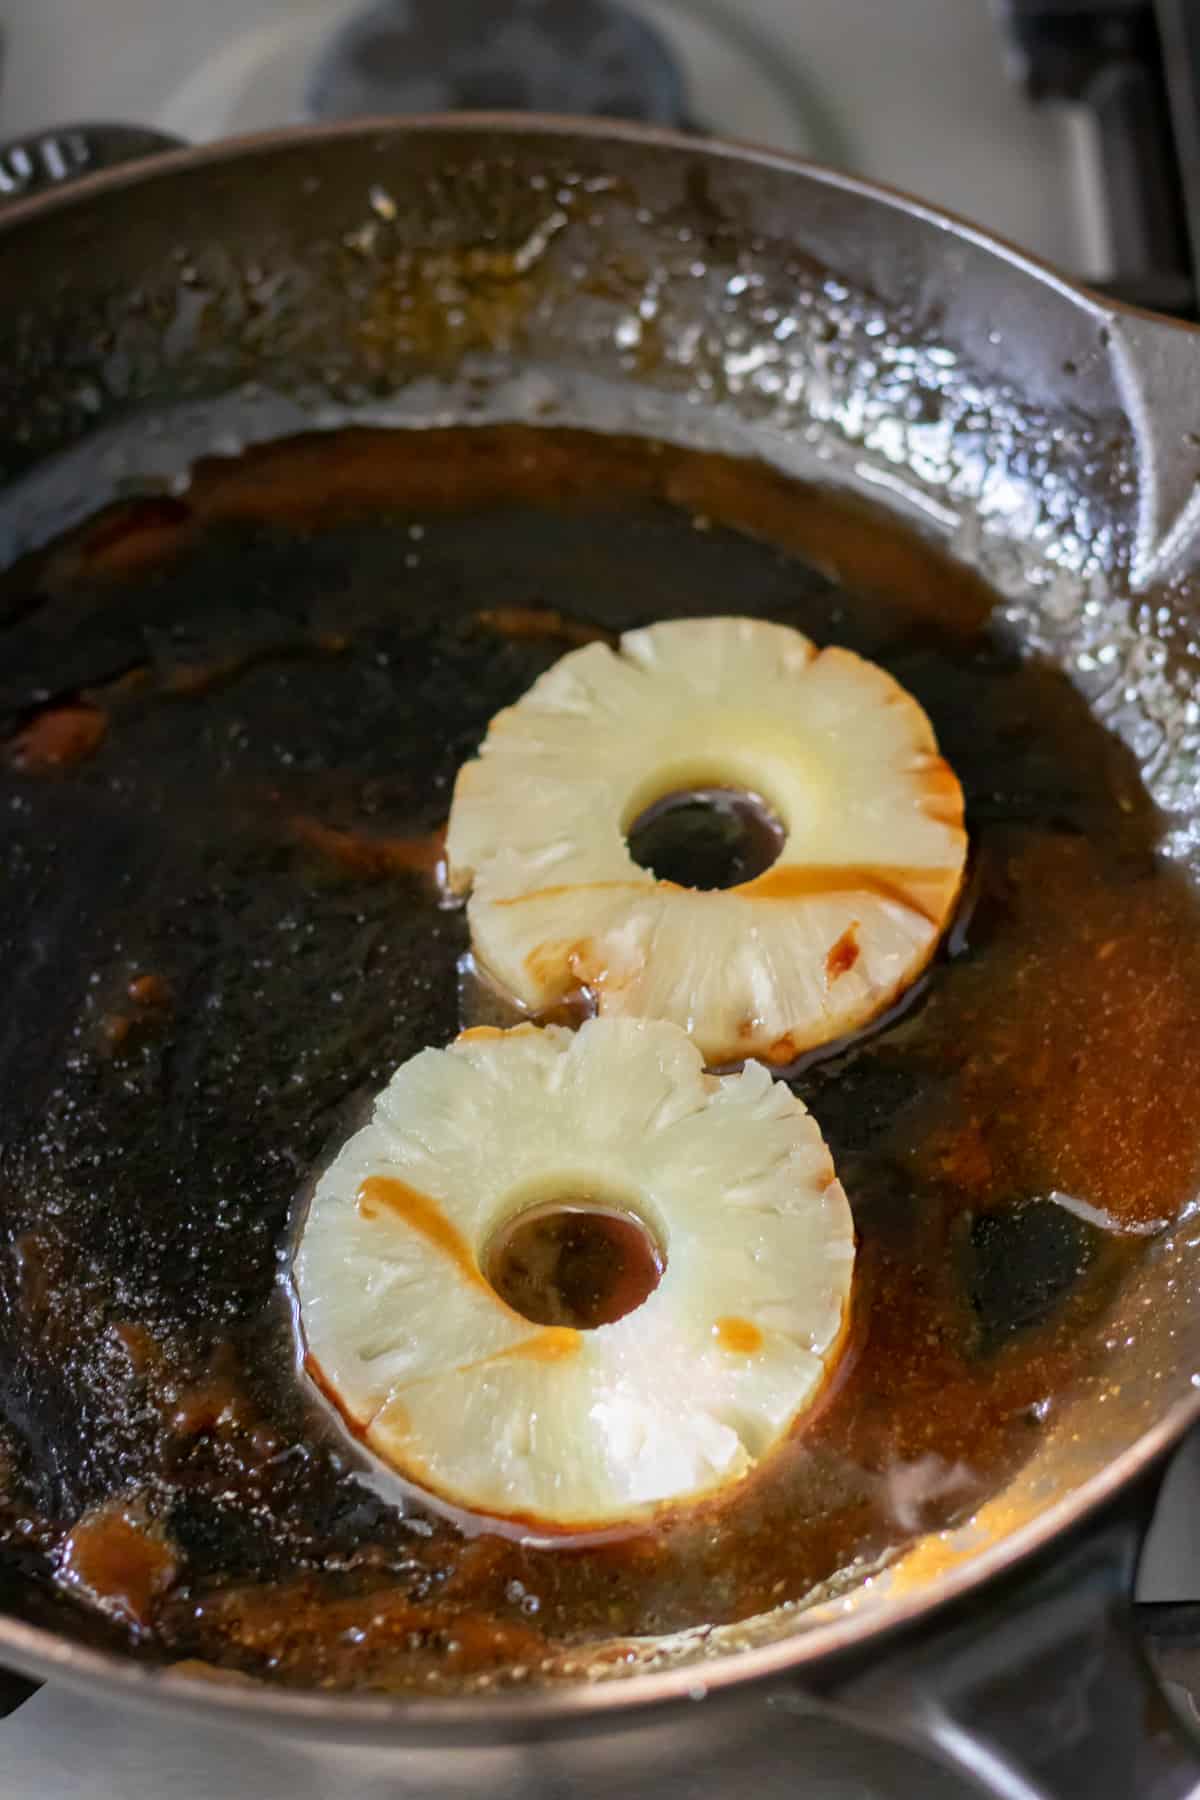 Pineapple rings added to the pan of glaze.